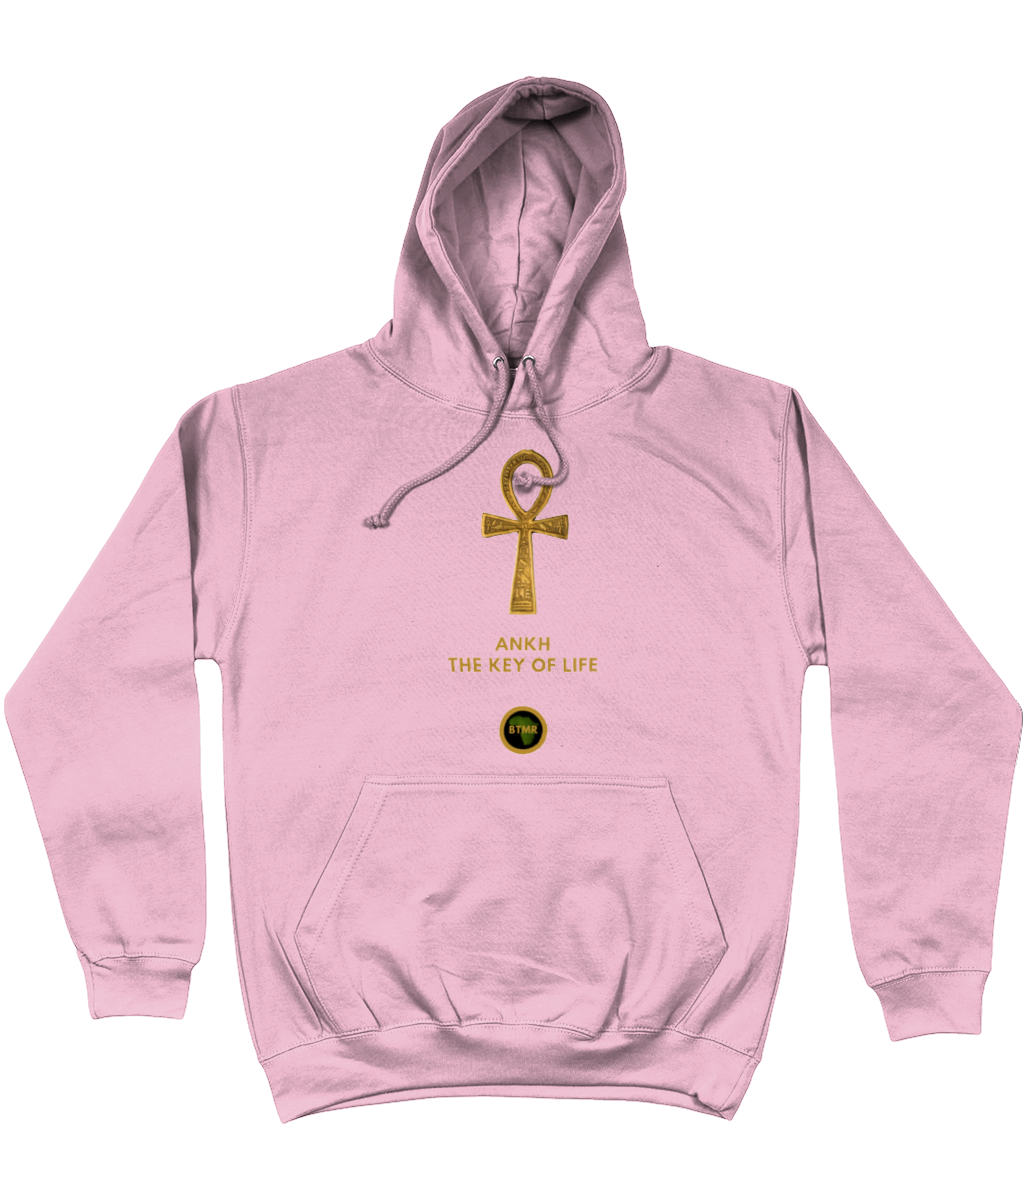 Product mockup photo of a candyfloss pink personalised Ankh Hoodie. Large gold Ankh in the  centre of the hoodie, with the words Ankh, The key of Life capitalised in Gold Font directly underneath the hoodie, with a round BTMR logo underneath. Hoodie is on a plain white background